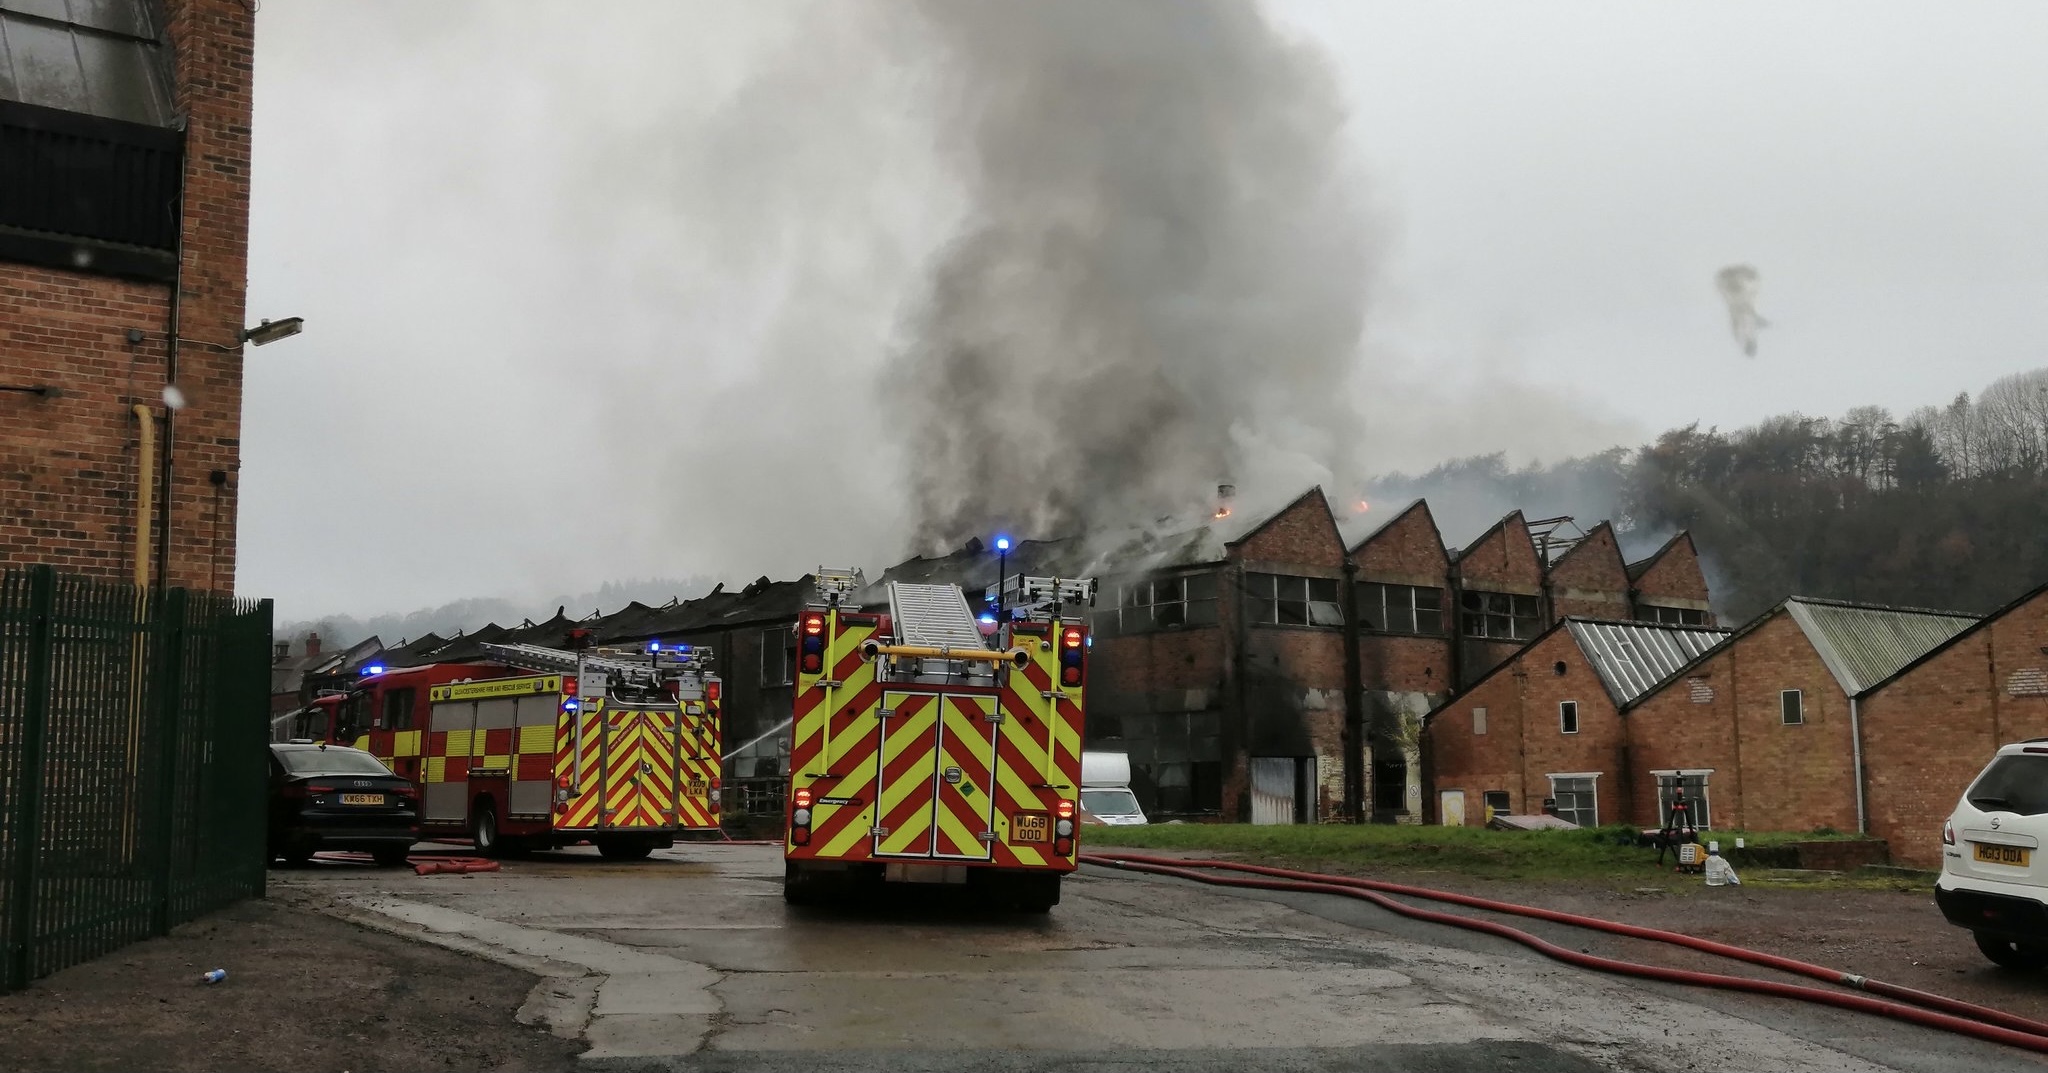 NEWS | Fire crews called to fire at industrial building